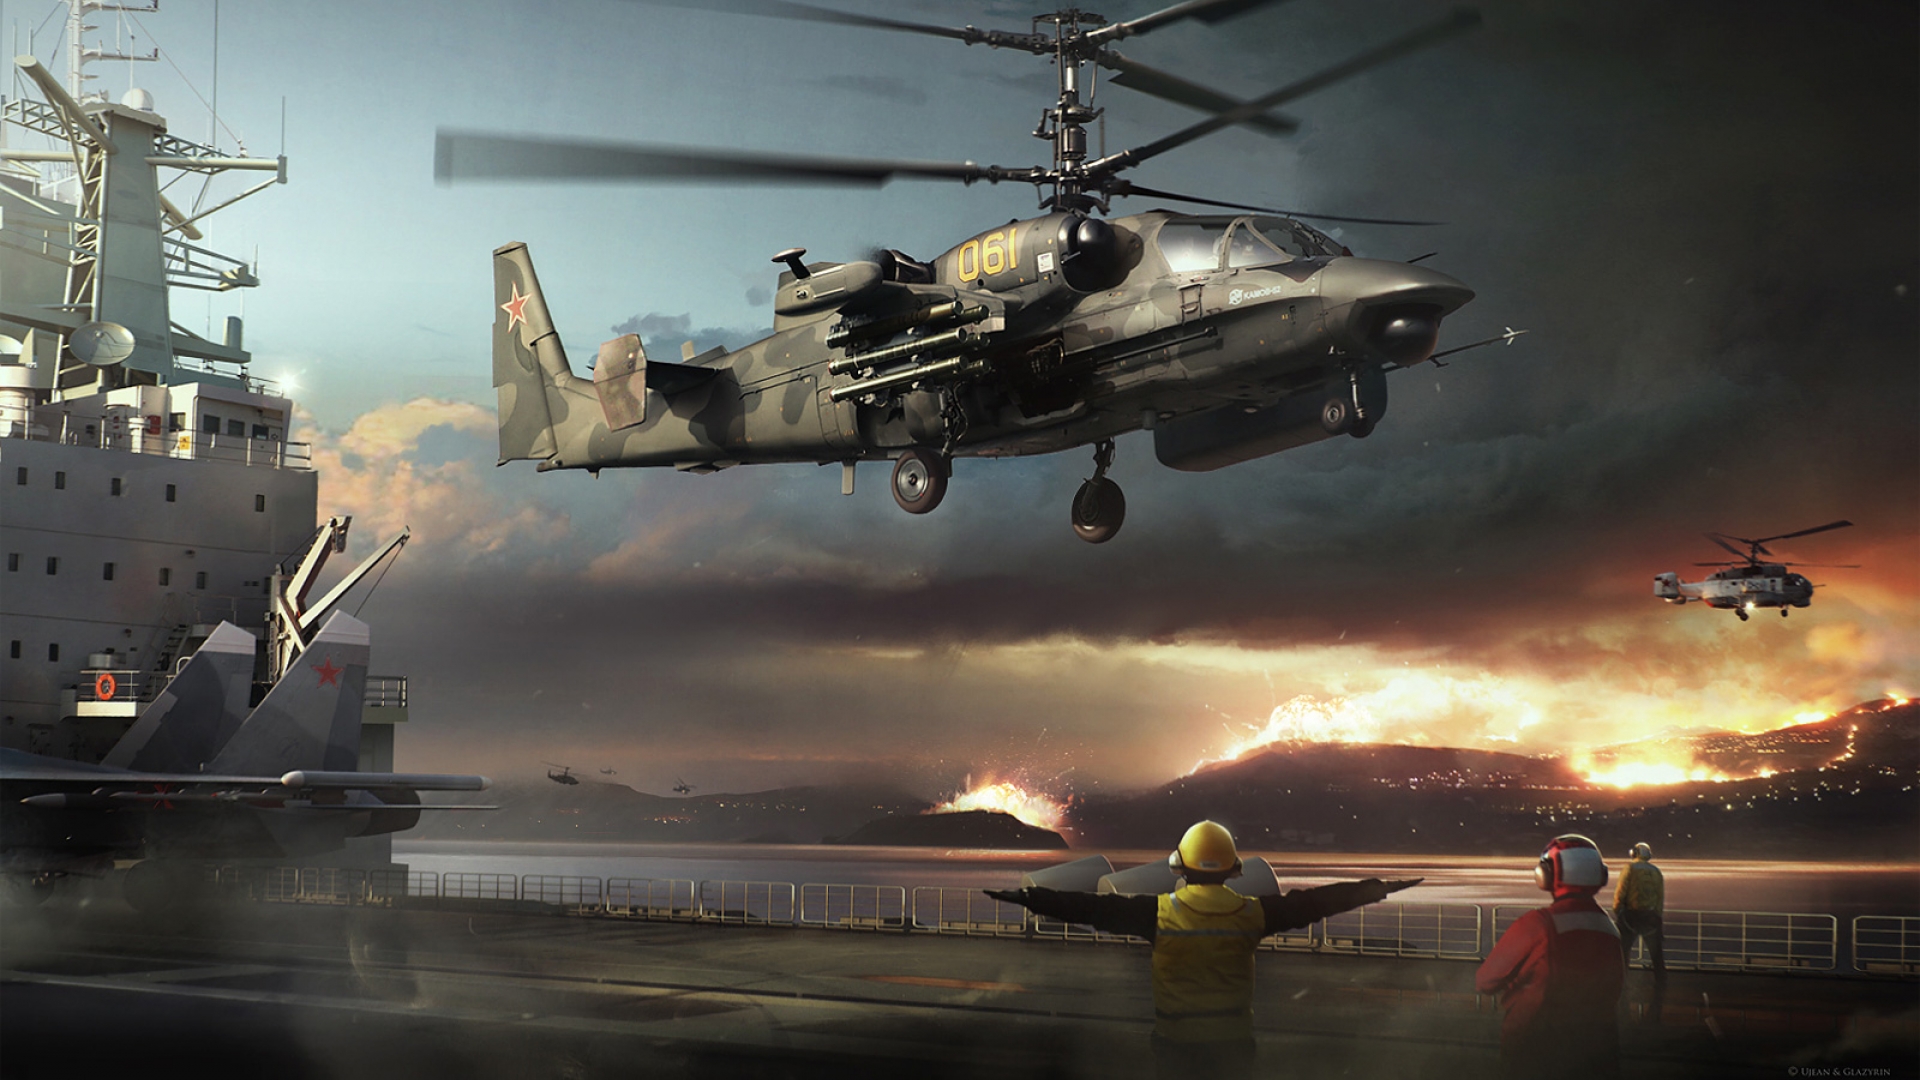 Attack Helicopter Wallpaper - High Definition, High Resolution HD  Wallpapers : High Definition, High Resolution HD Wallpapers